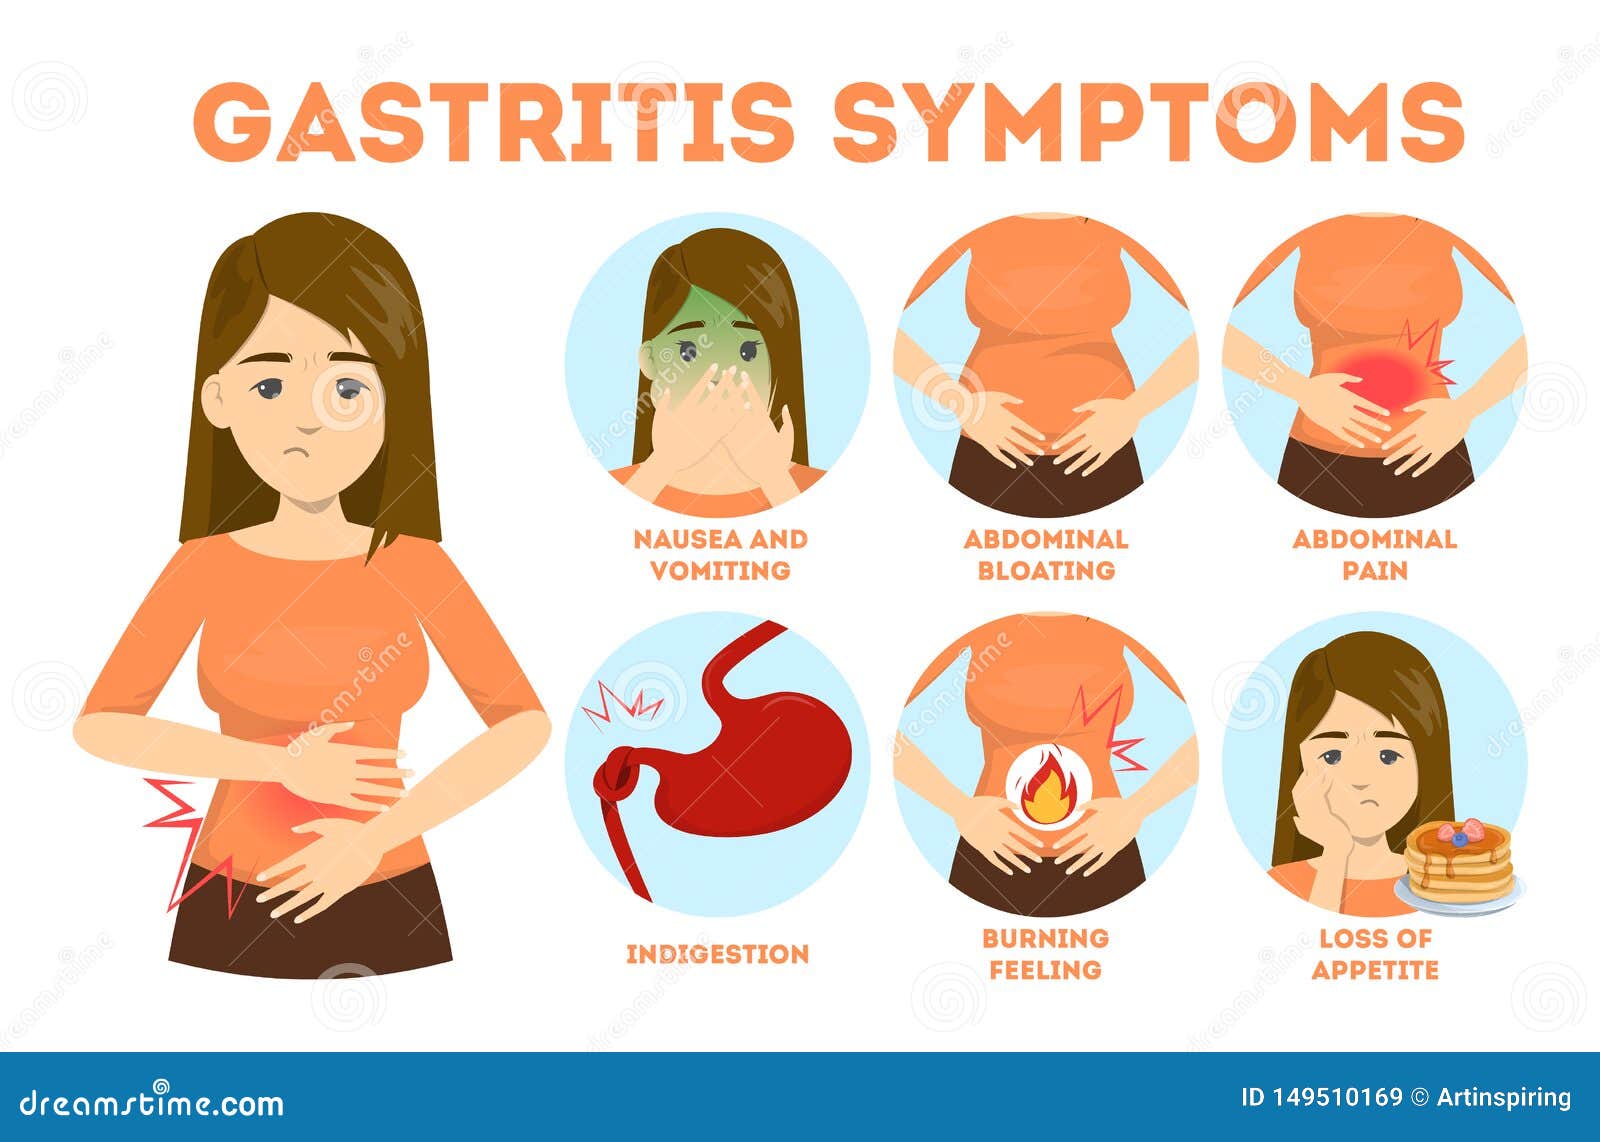 Gastritis Symptoms Infographic A Digestive System Disease Stock Vector